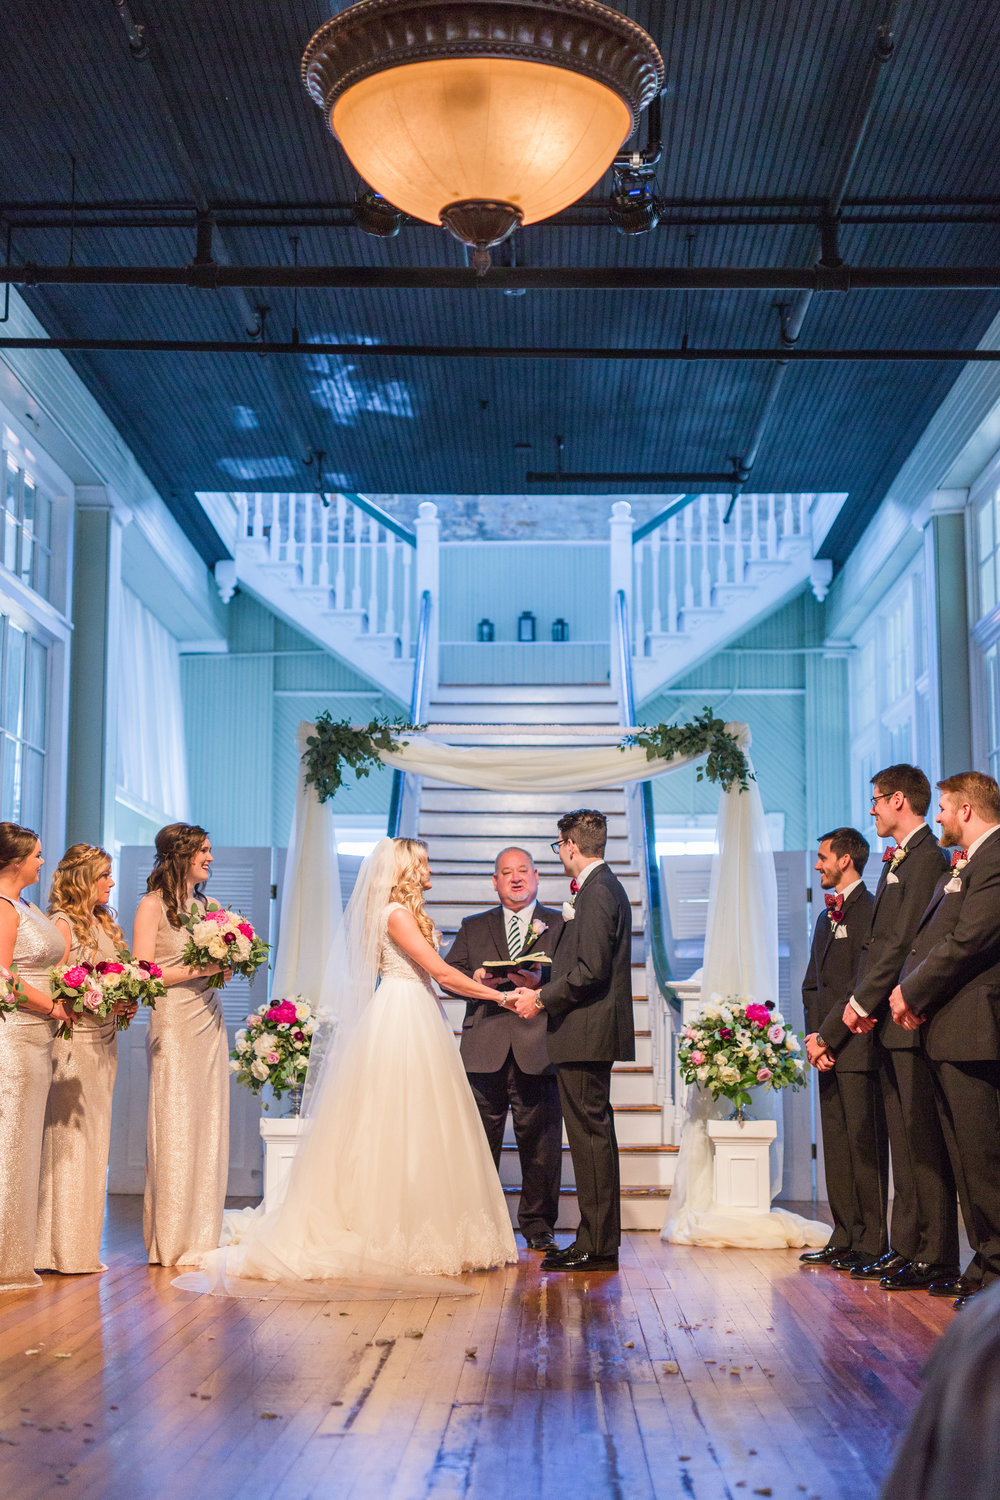 We incorporated the draping arch while insuring the florals matched the rest of the ceremony